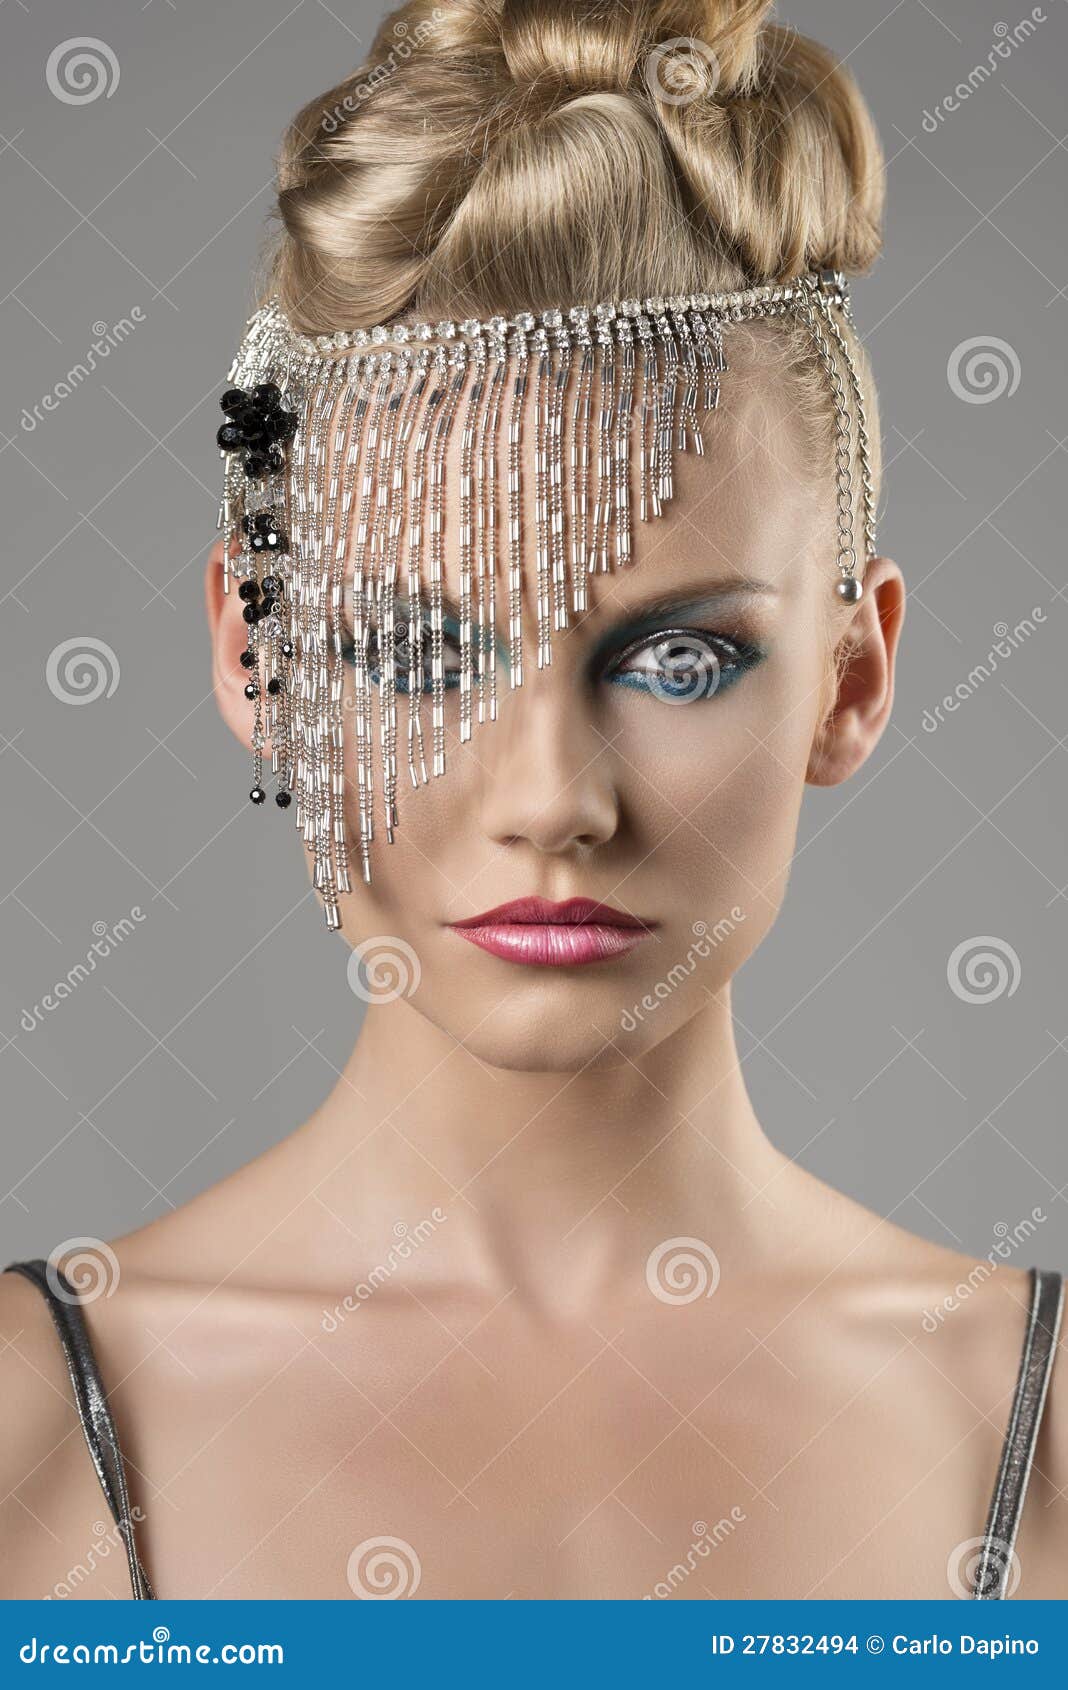 Blonde Girl With Indian Accessory Stock Images - Image 